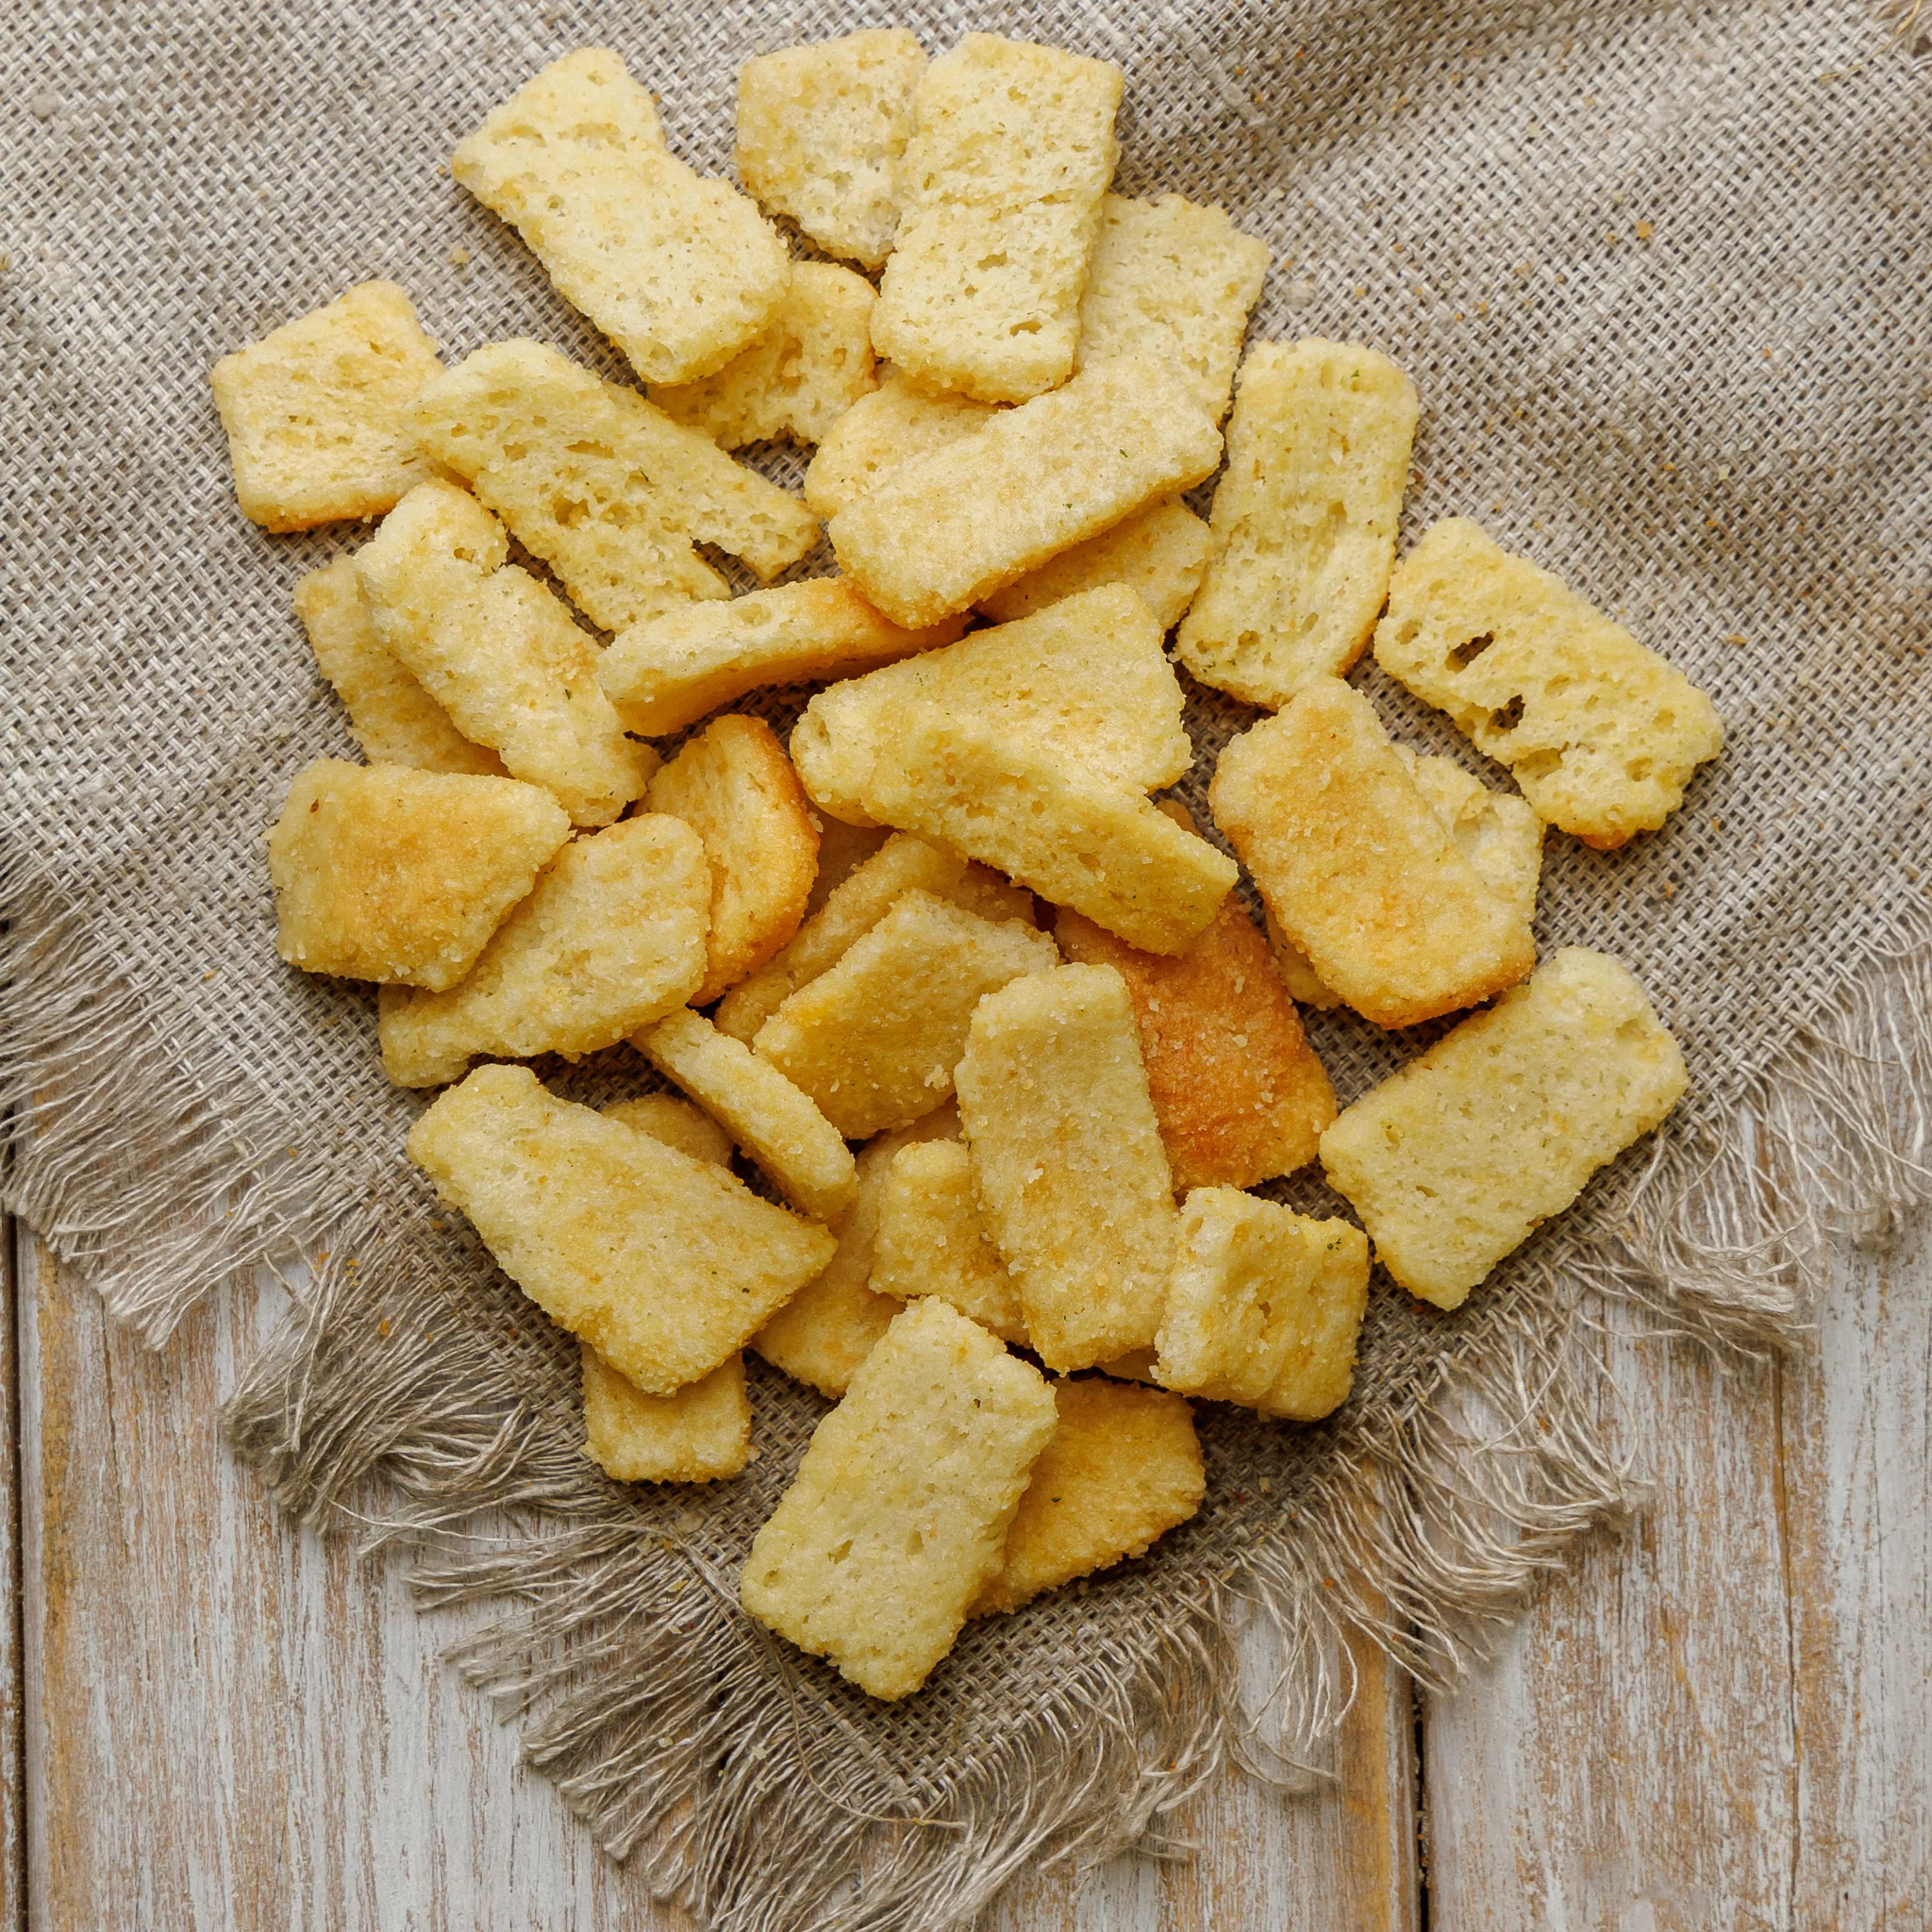 Golden wheat crackers on cream 1 kg / Golden Crackers on cream 1000 gr / Croutons / Snacks for soup